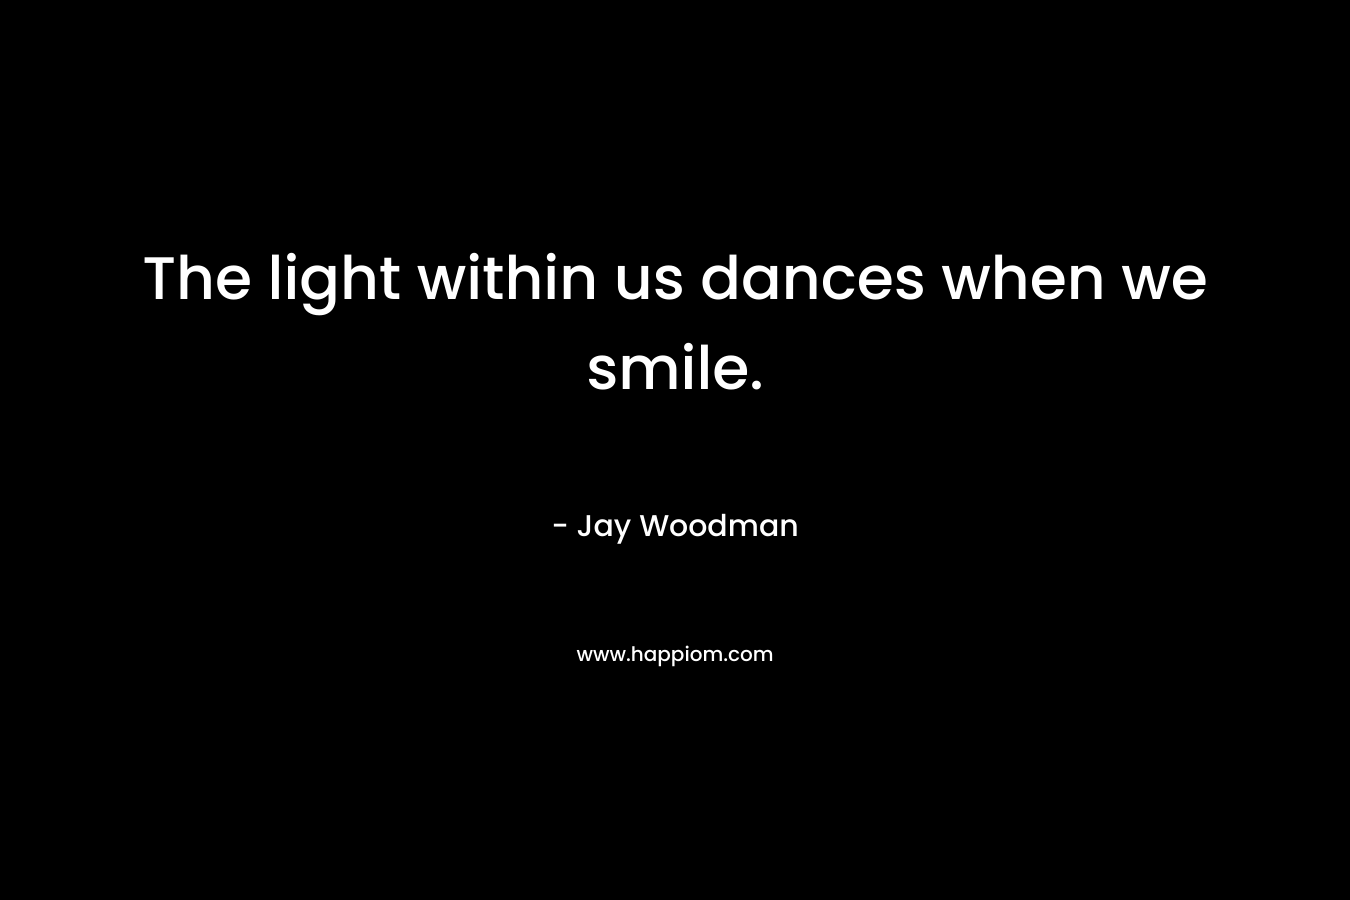 The light within us dances when we smile.